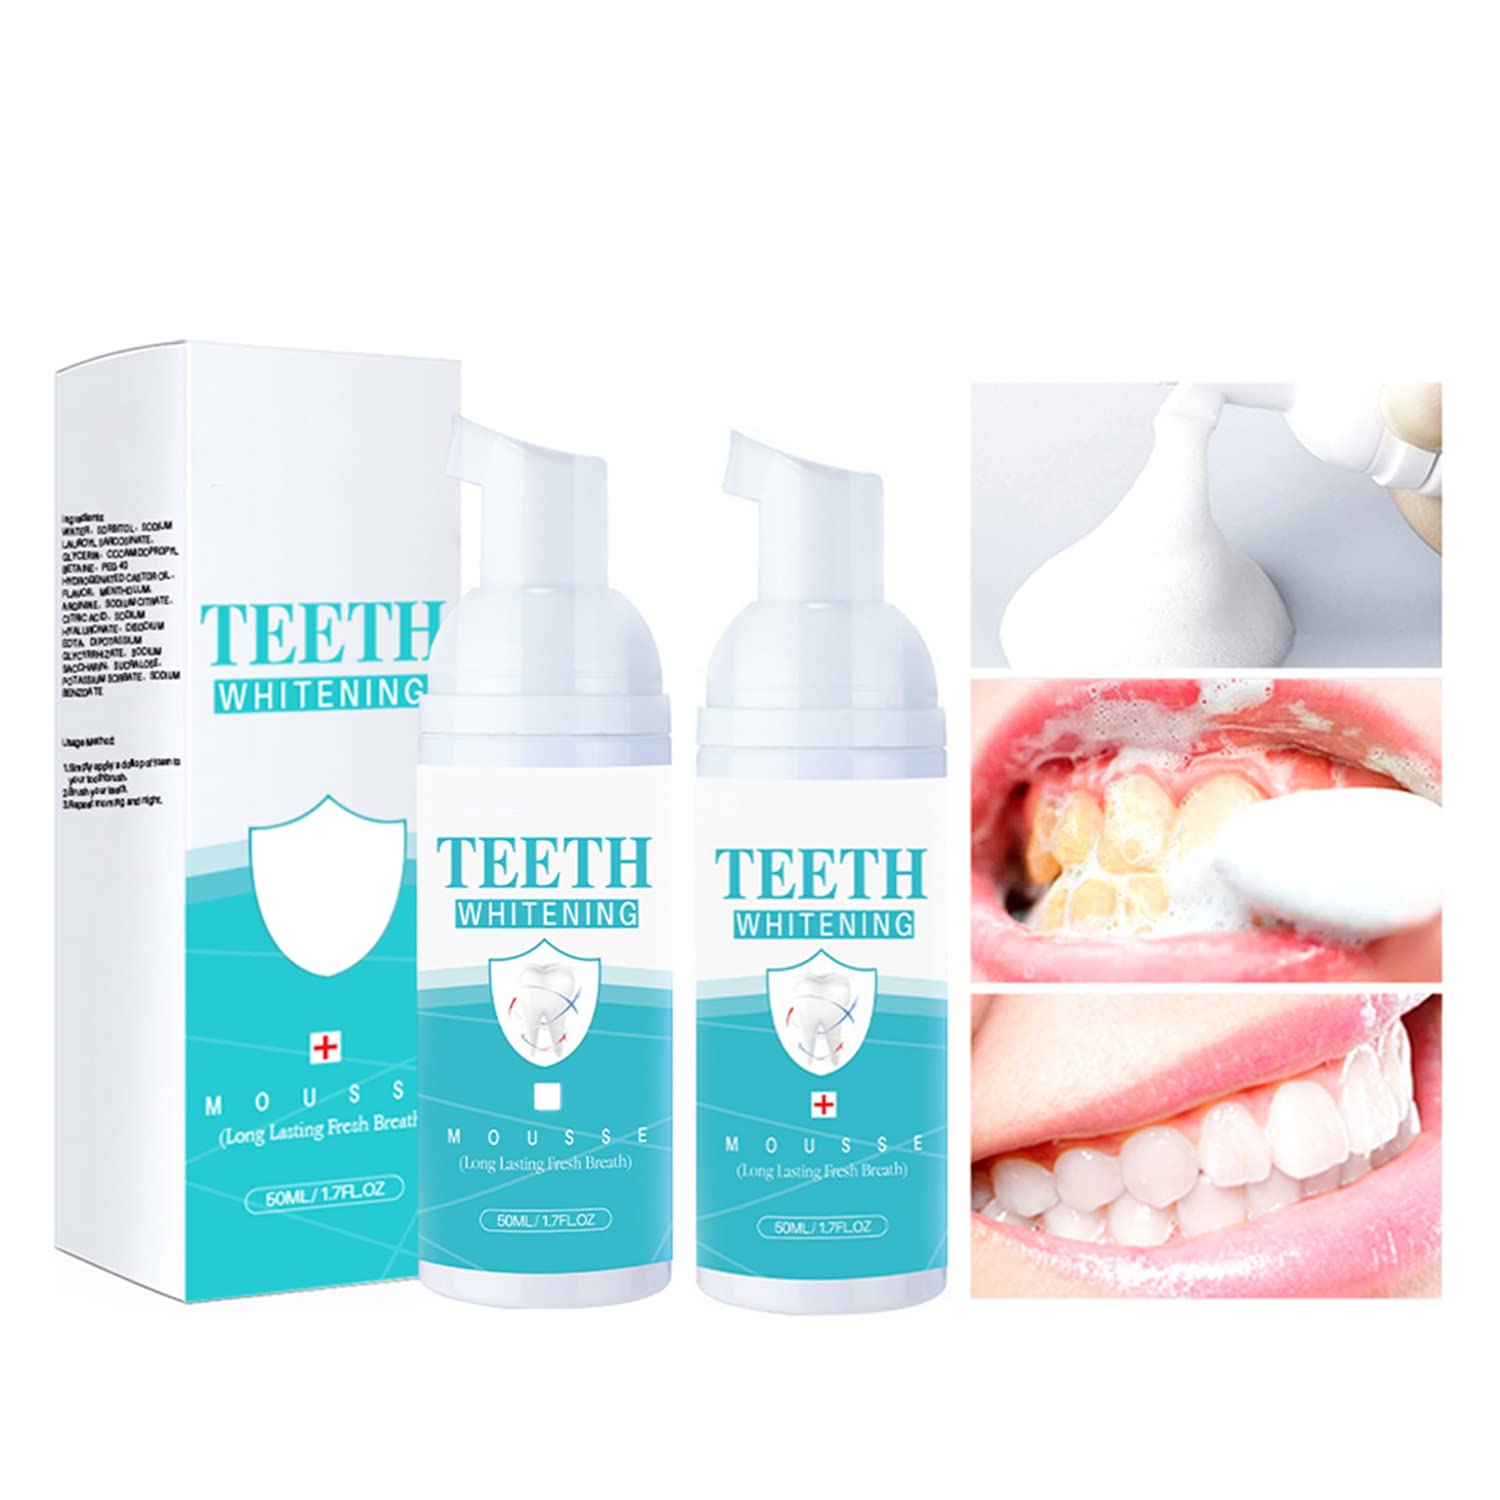 2PCs Teeth Whitening Mousse Foam Refreshing Breath Deep Cleaning Toothpaste  Fresh Breath Ultra-fine Mousse Whitening Toothpaste Foam Oral Care  Toothpaste Mouthwash